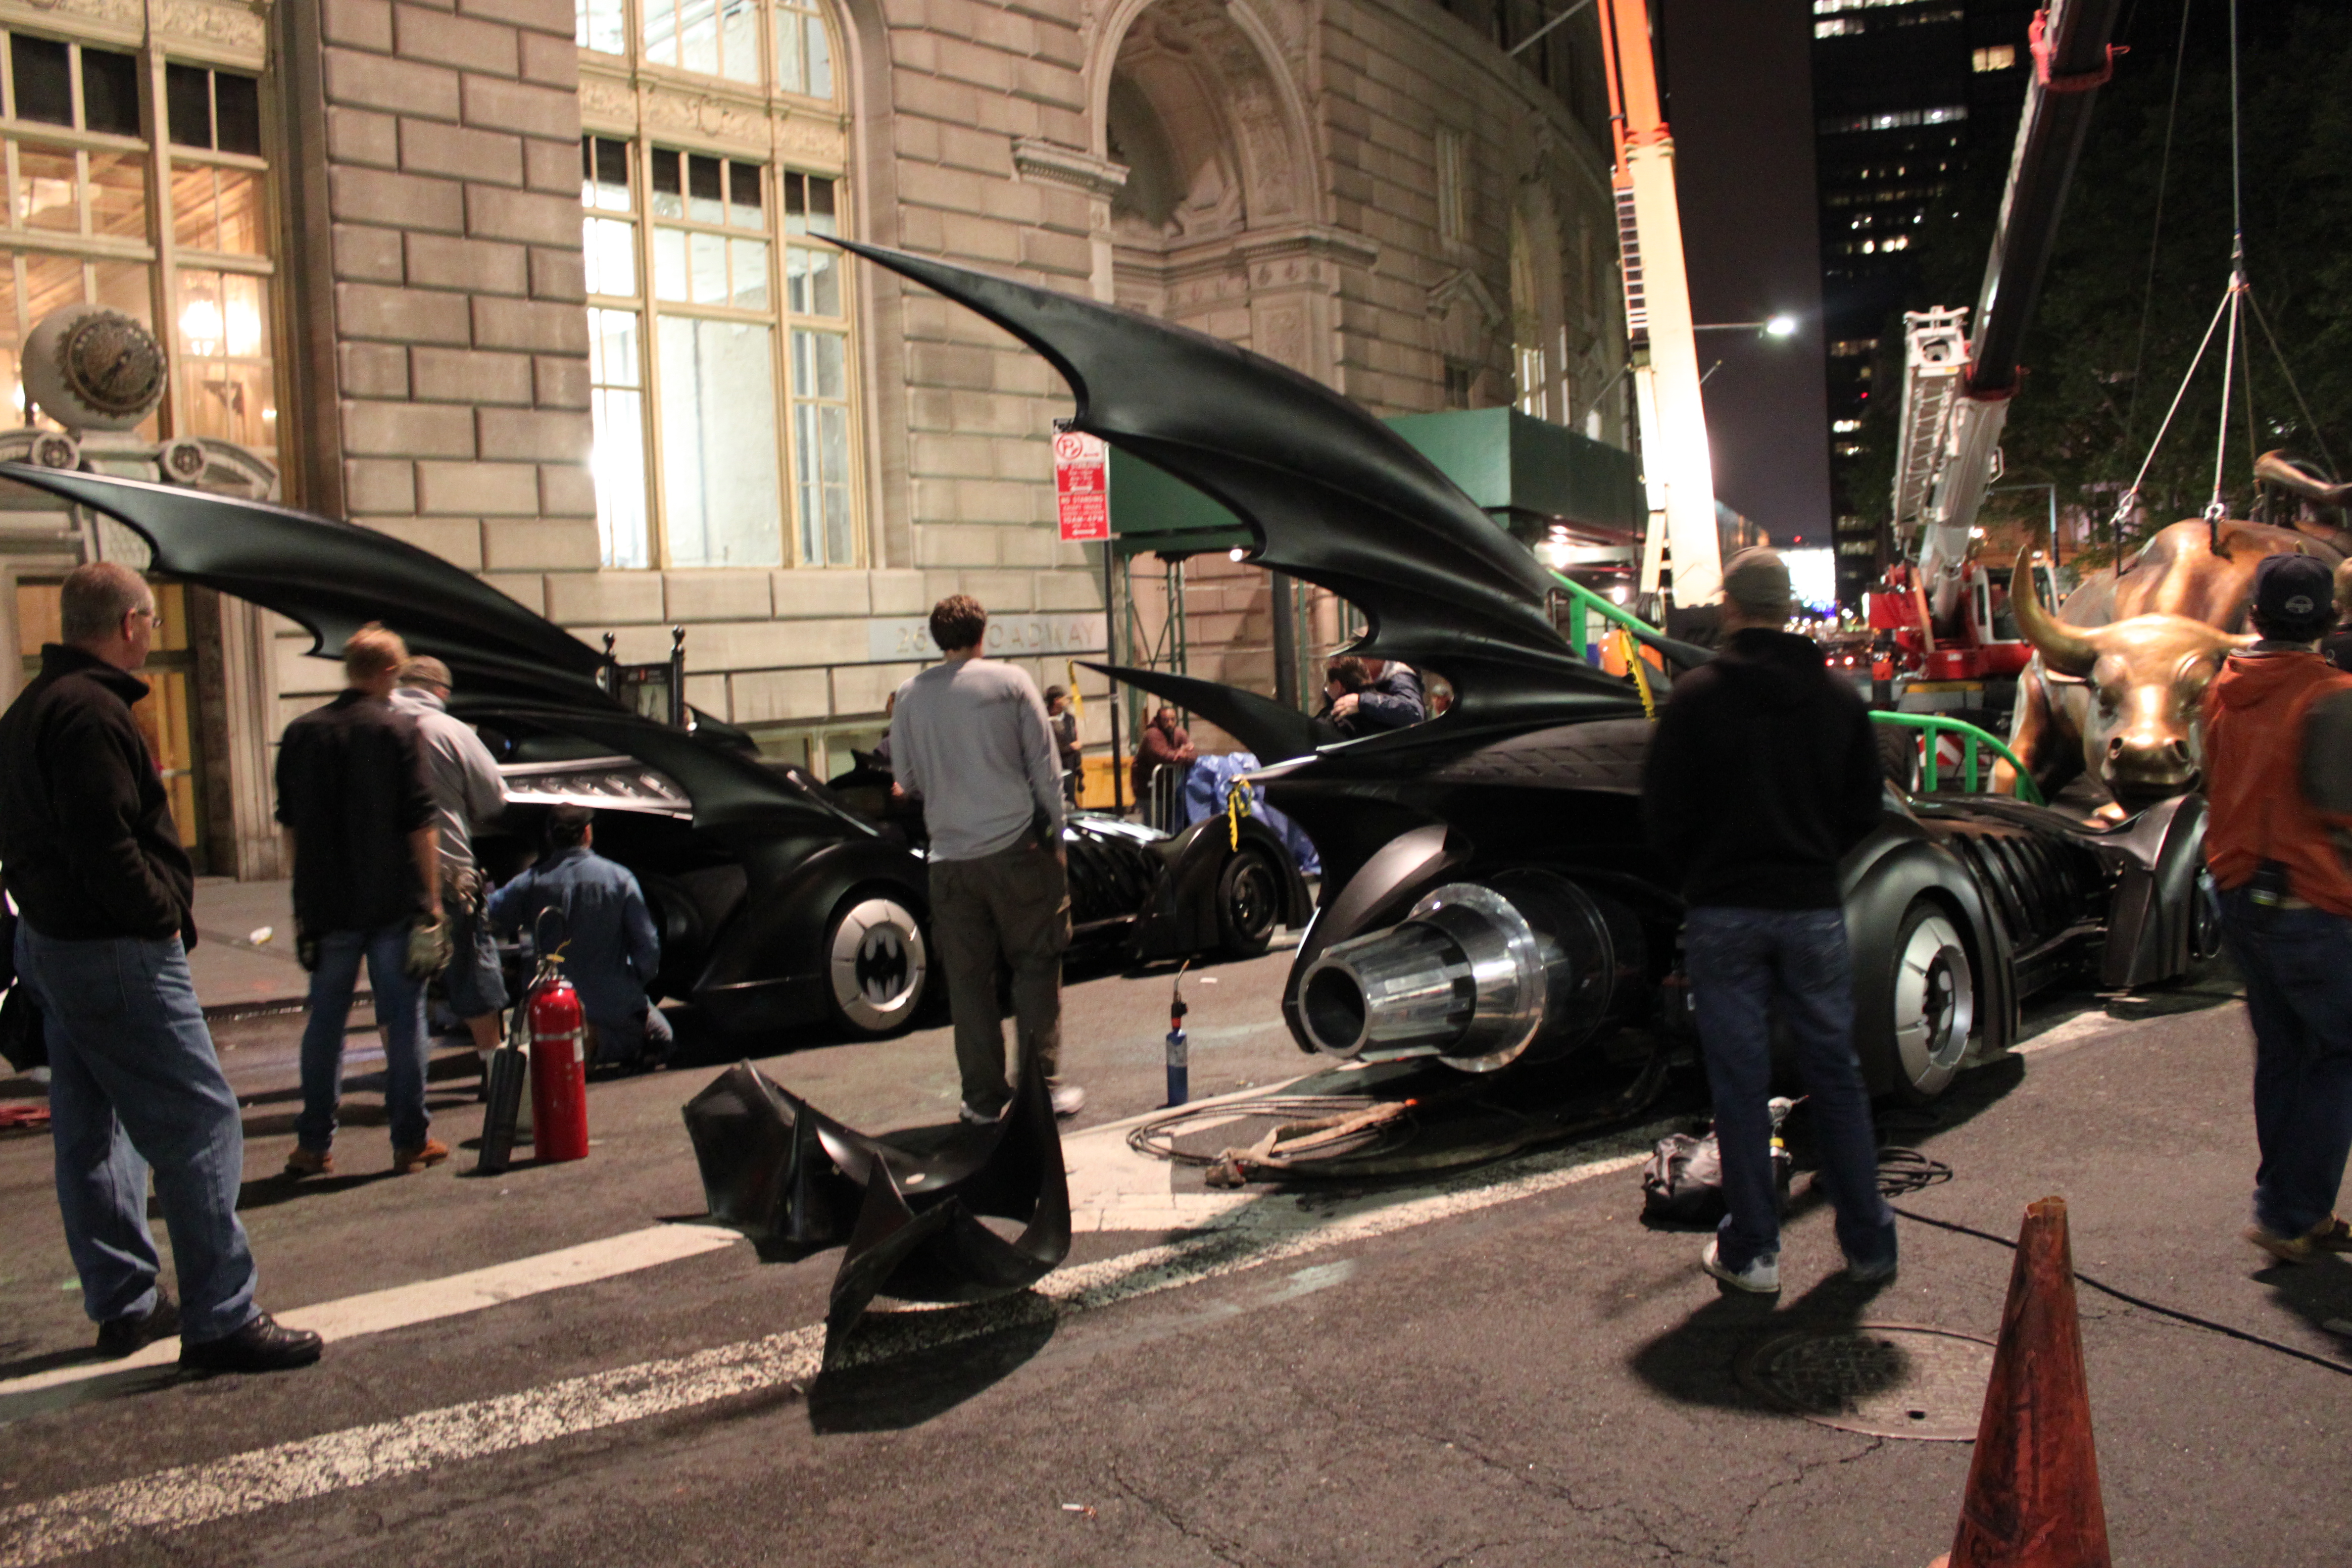 on the set of the movie Arthur 2011, the batmobile on the right we built as a special effects vehicle